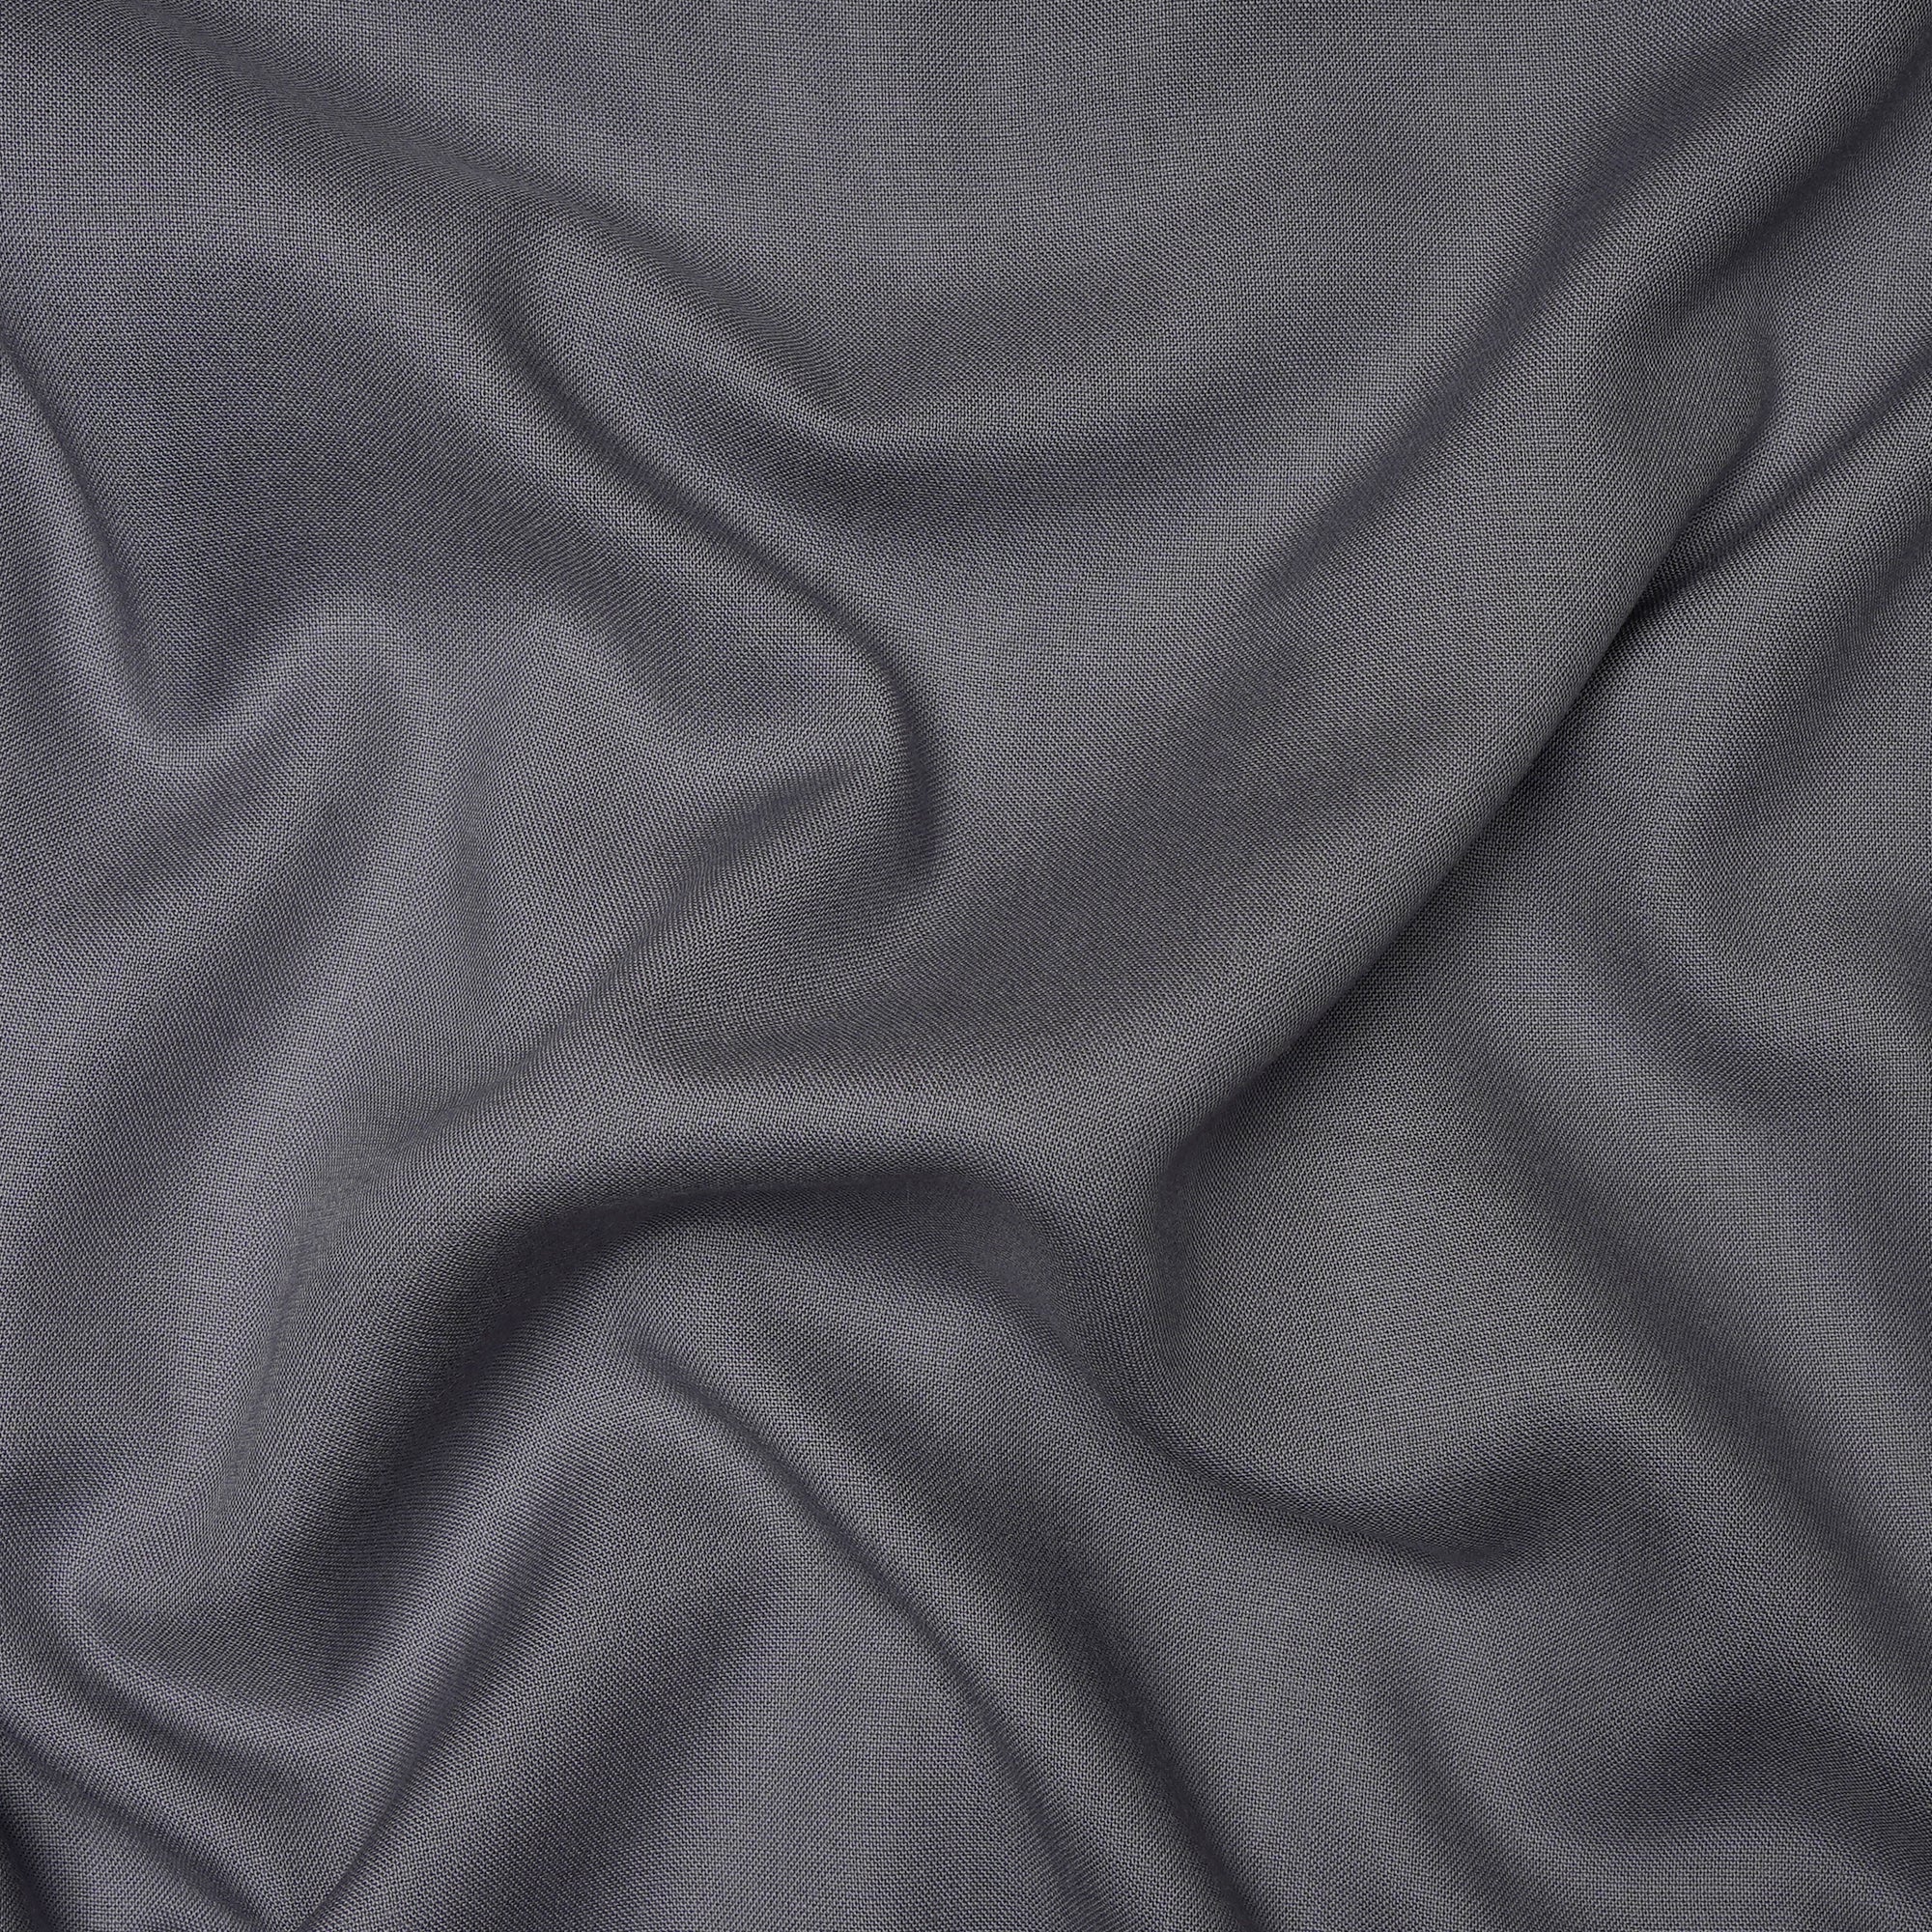 Porpoise Plain Mill Dyed Rayon Fabric